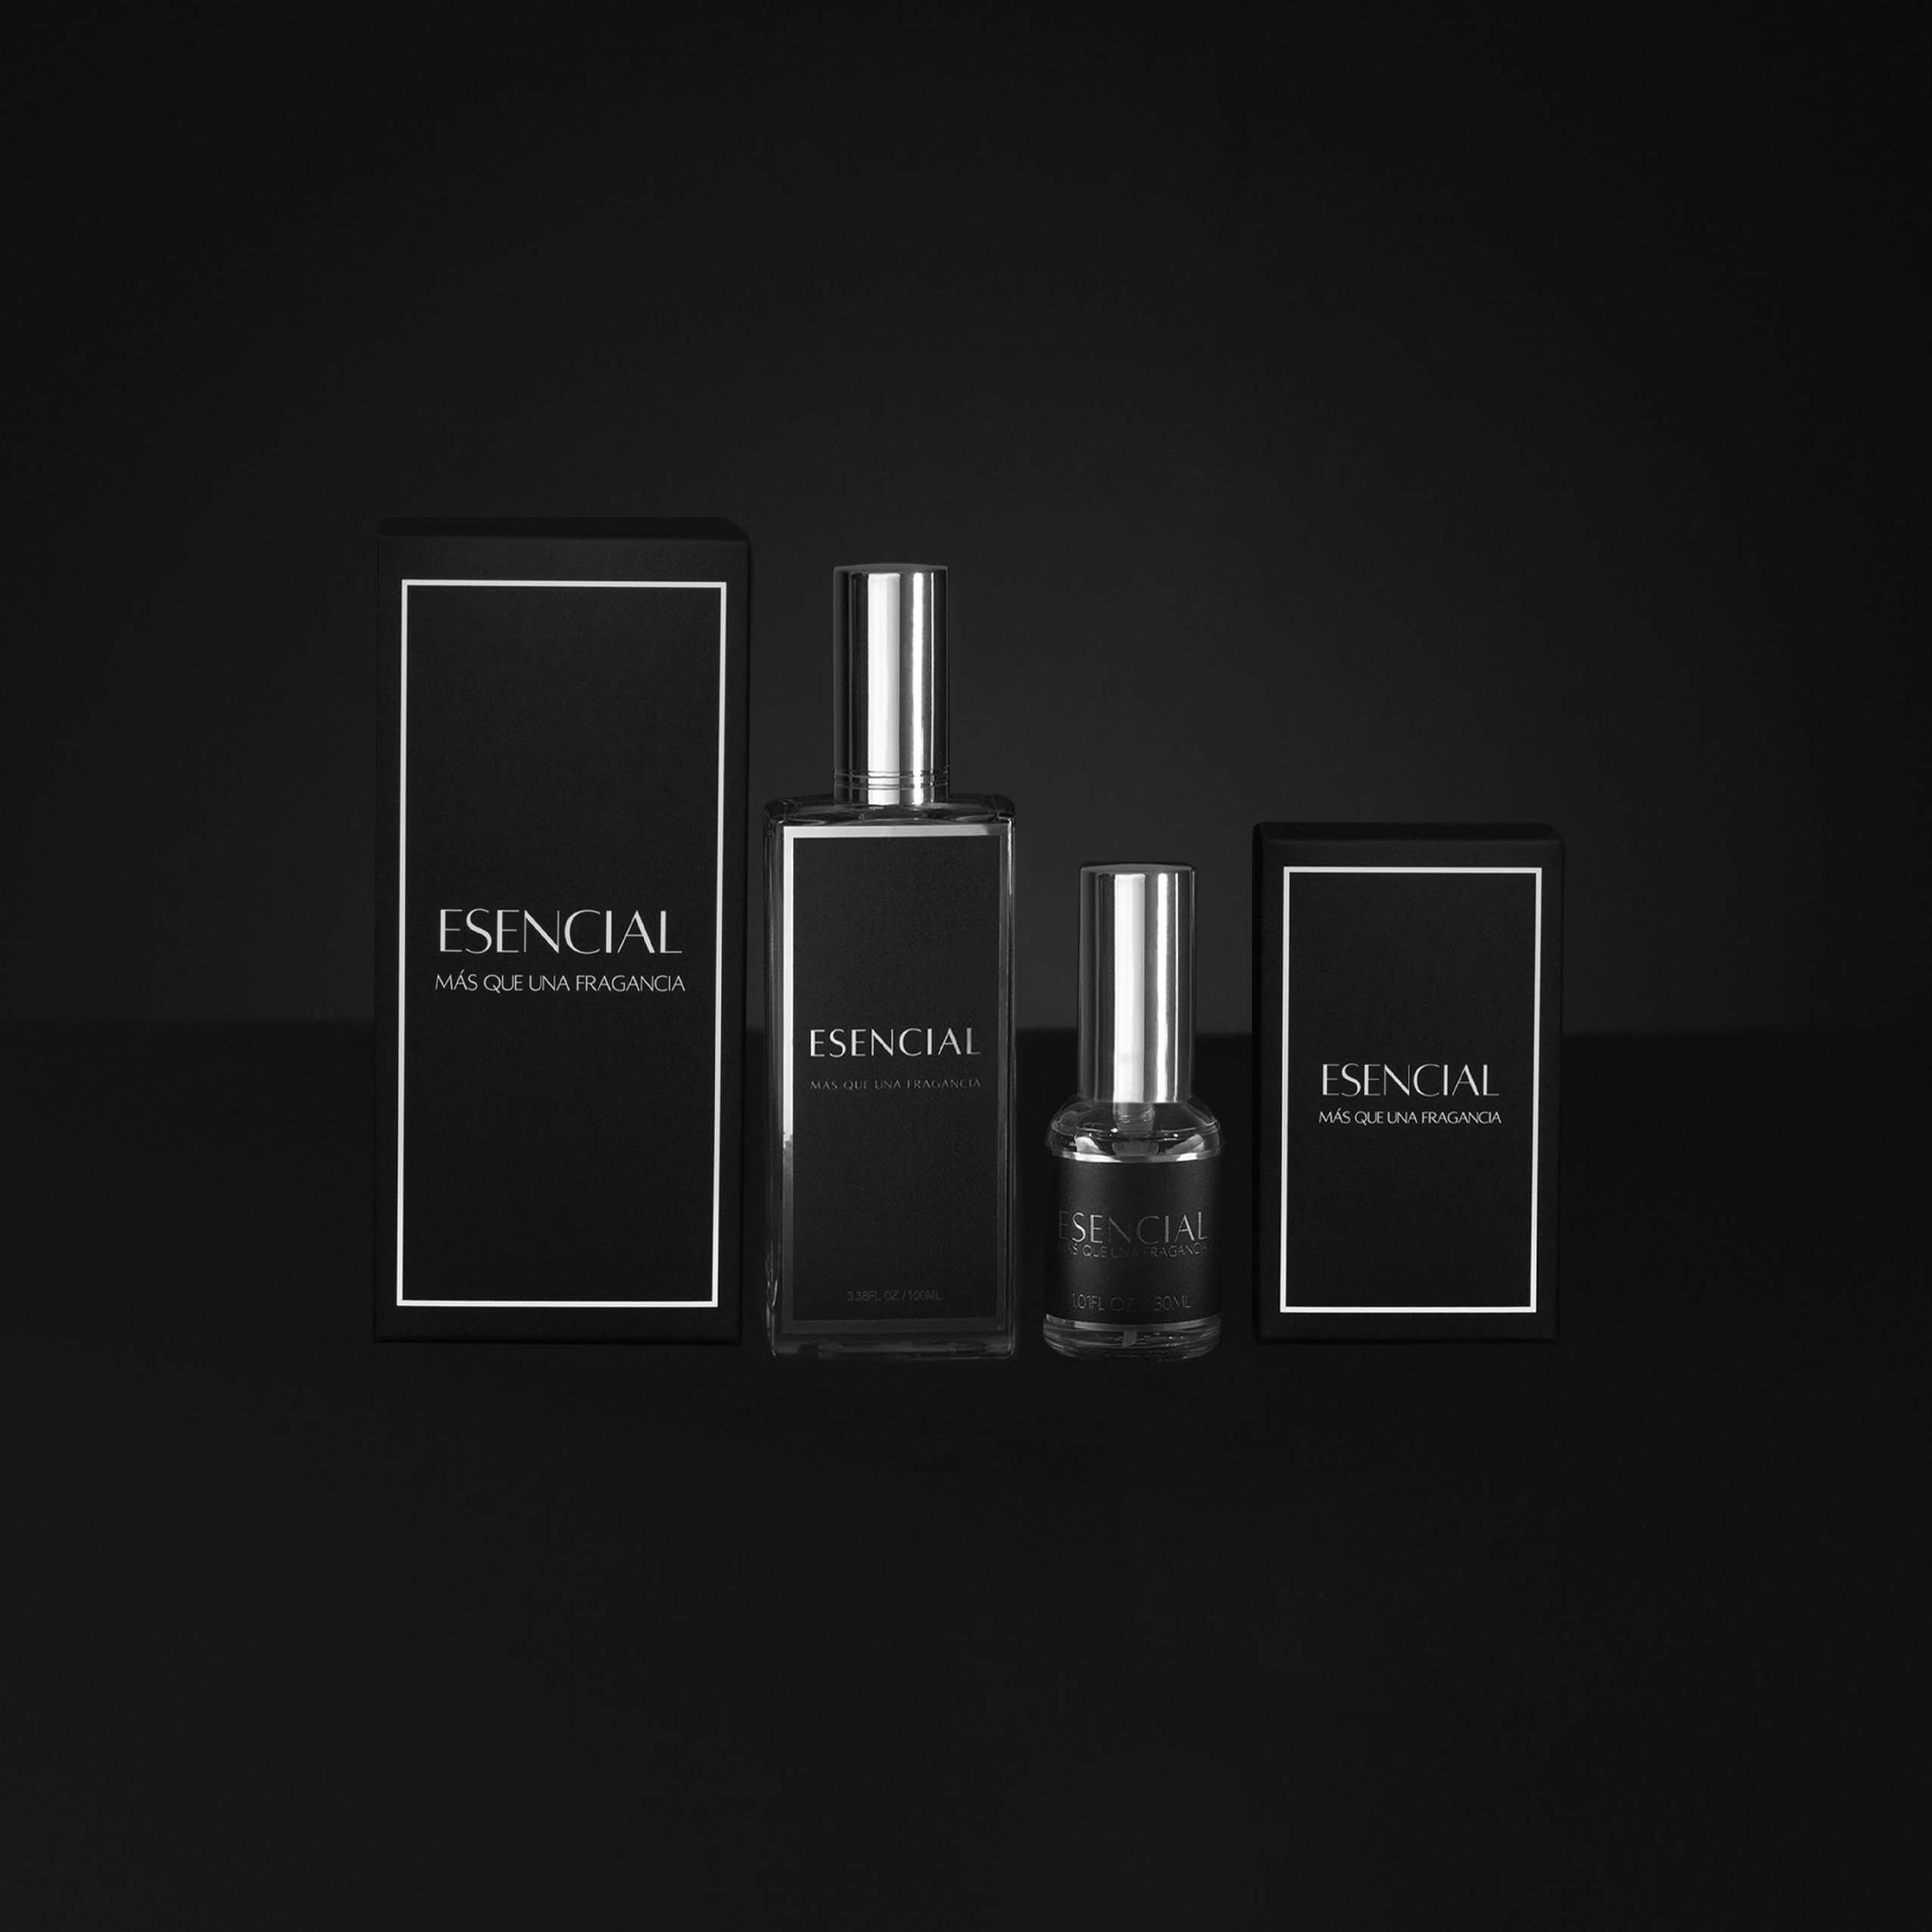 H261 Inspired by: Oud for Greatness - Initio Parfums Prives